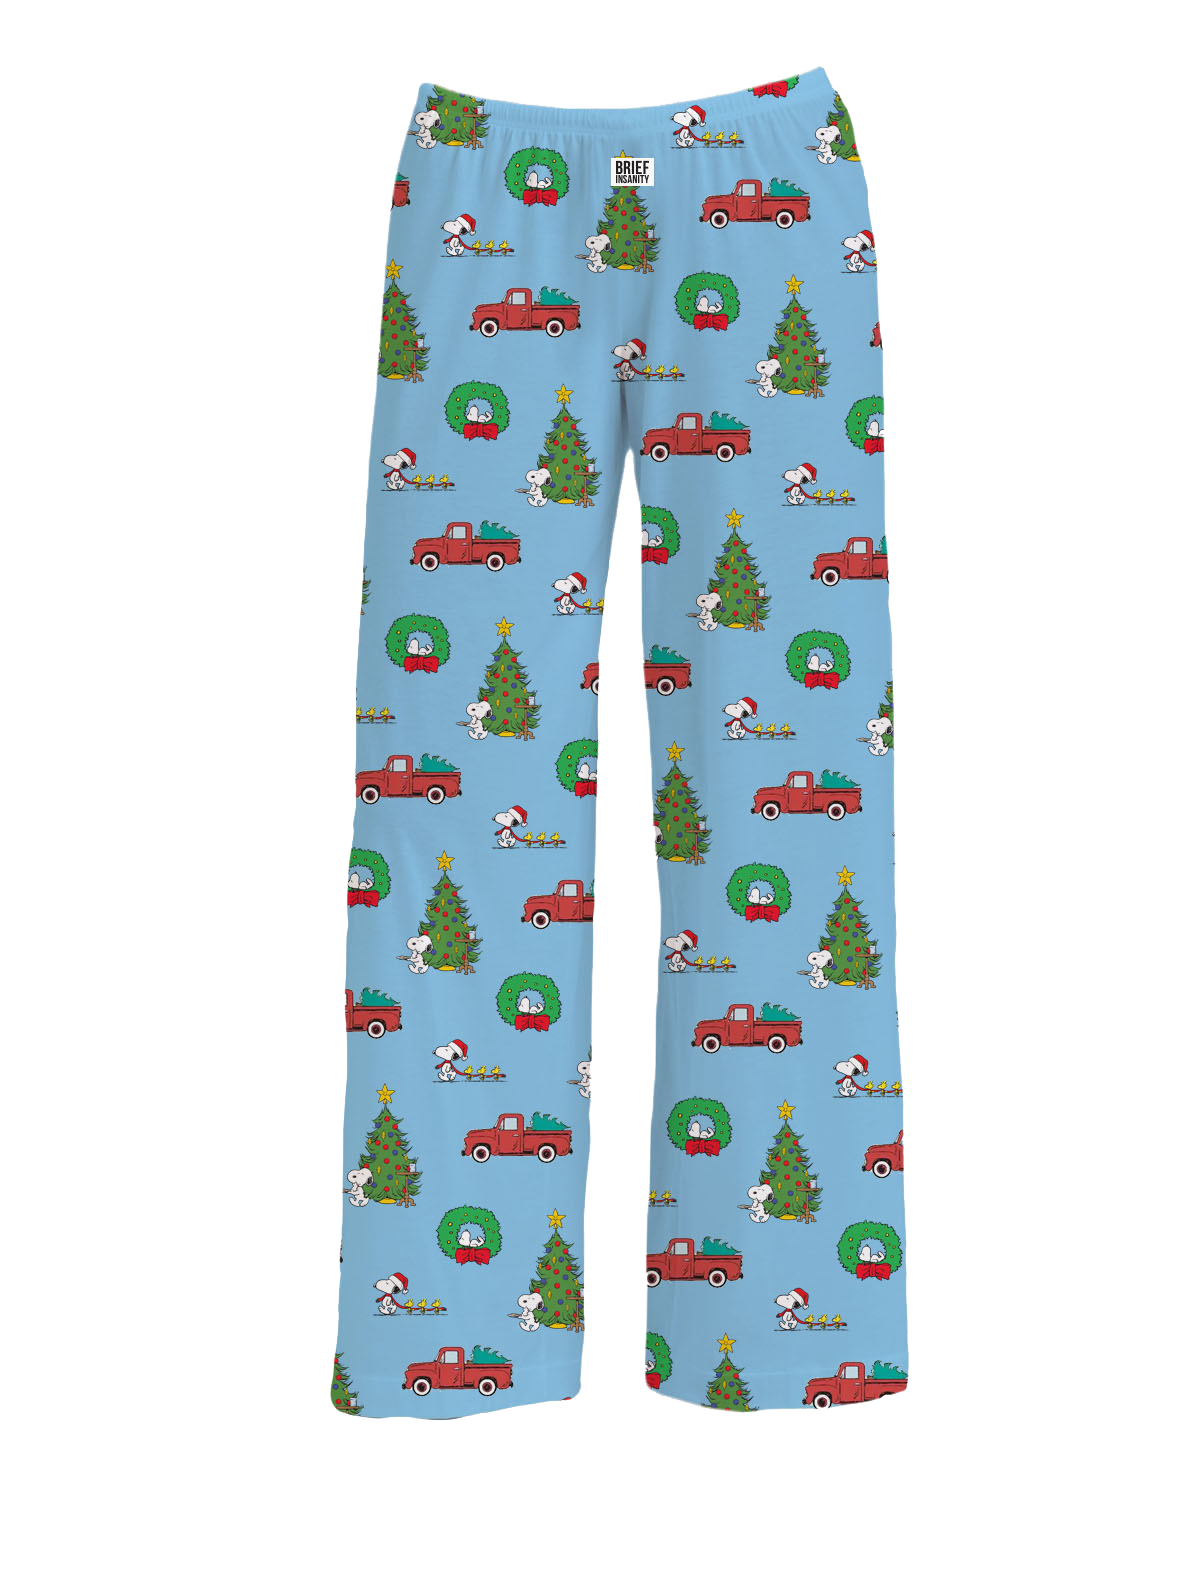 BRIEF INSANITY Snoopy Unisex Lounge Pajama Pants - Comfy, Loose-Fit,  Ultra-Soft - Snoopy Lazy Days Sleep Bottoms (Small) at  Women's  Clothing store